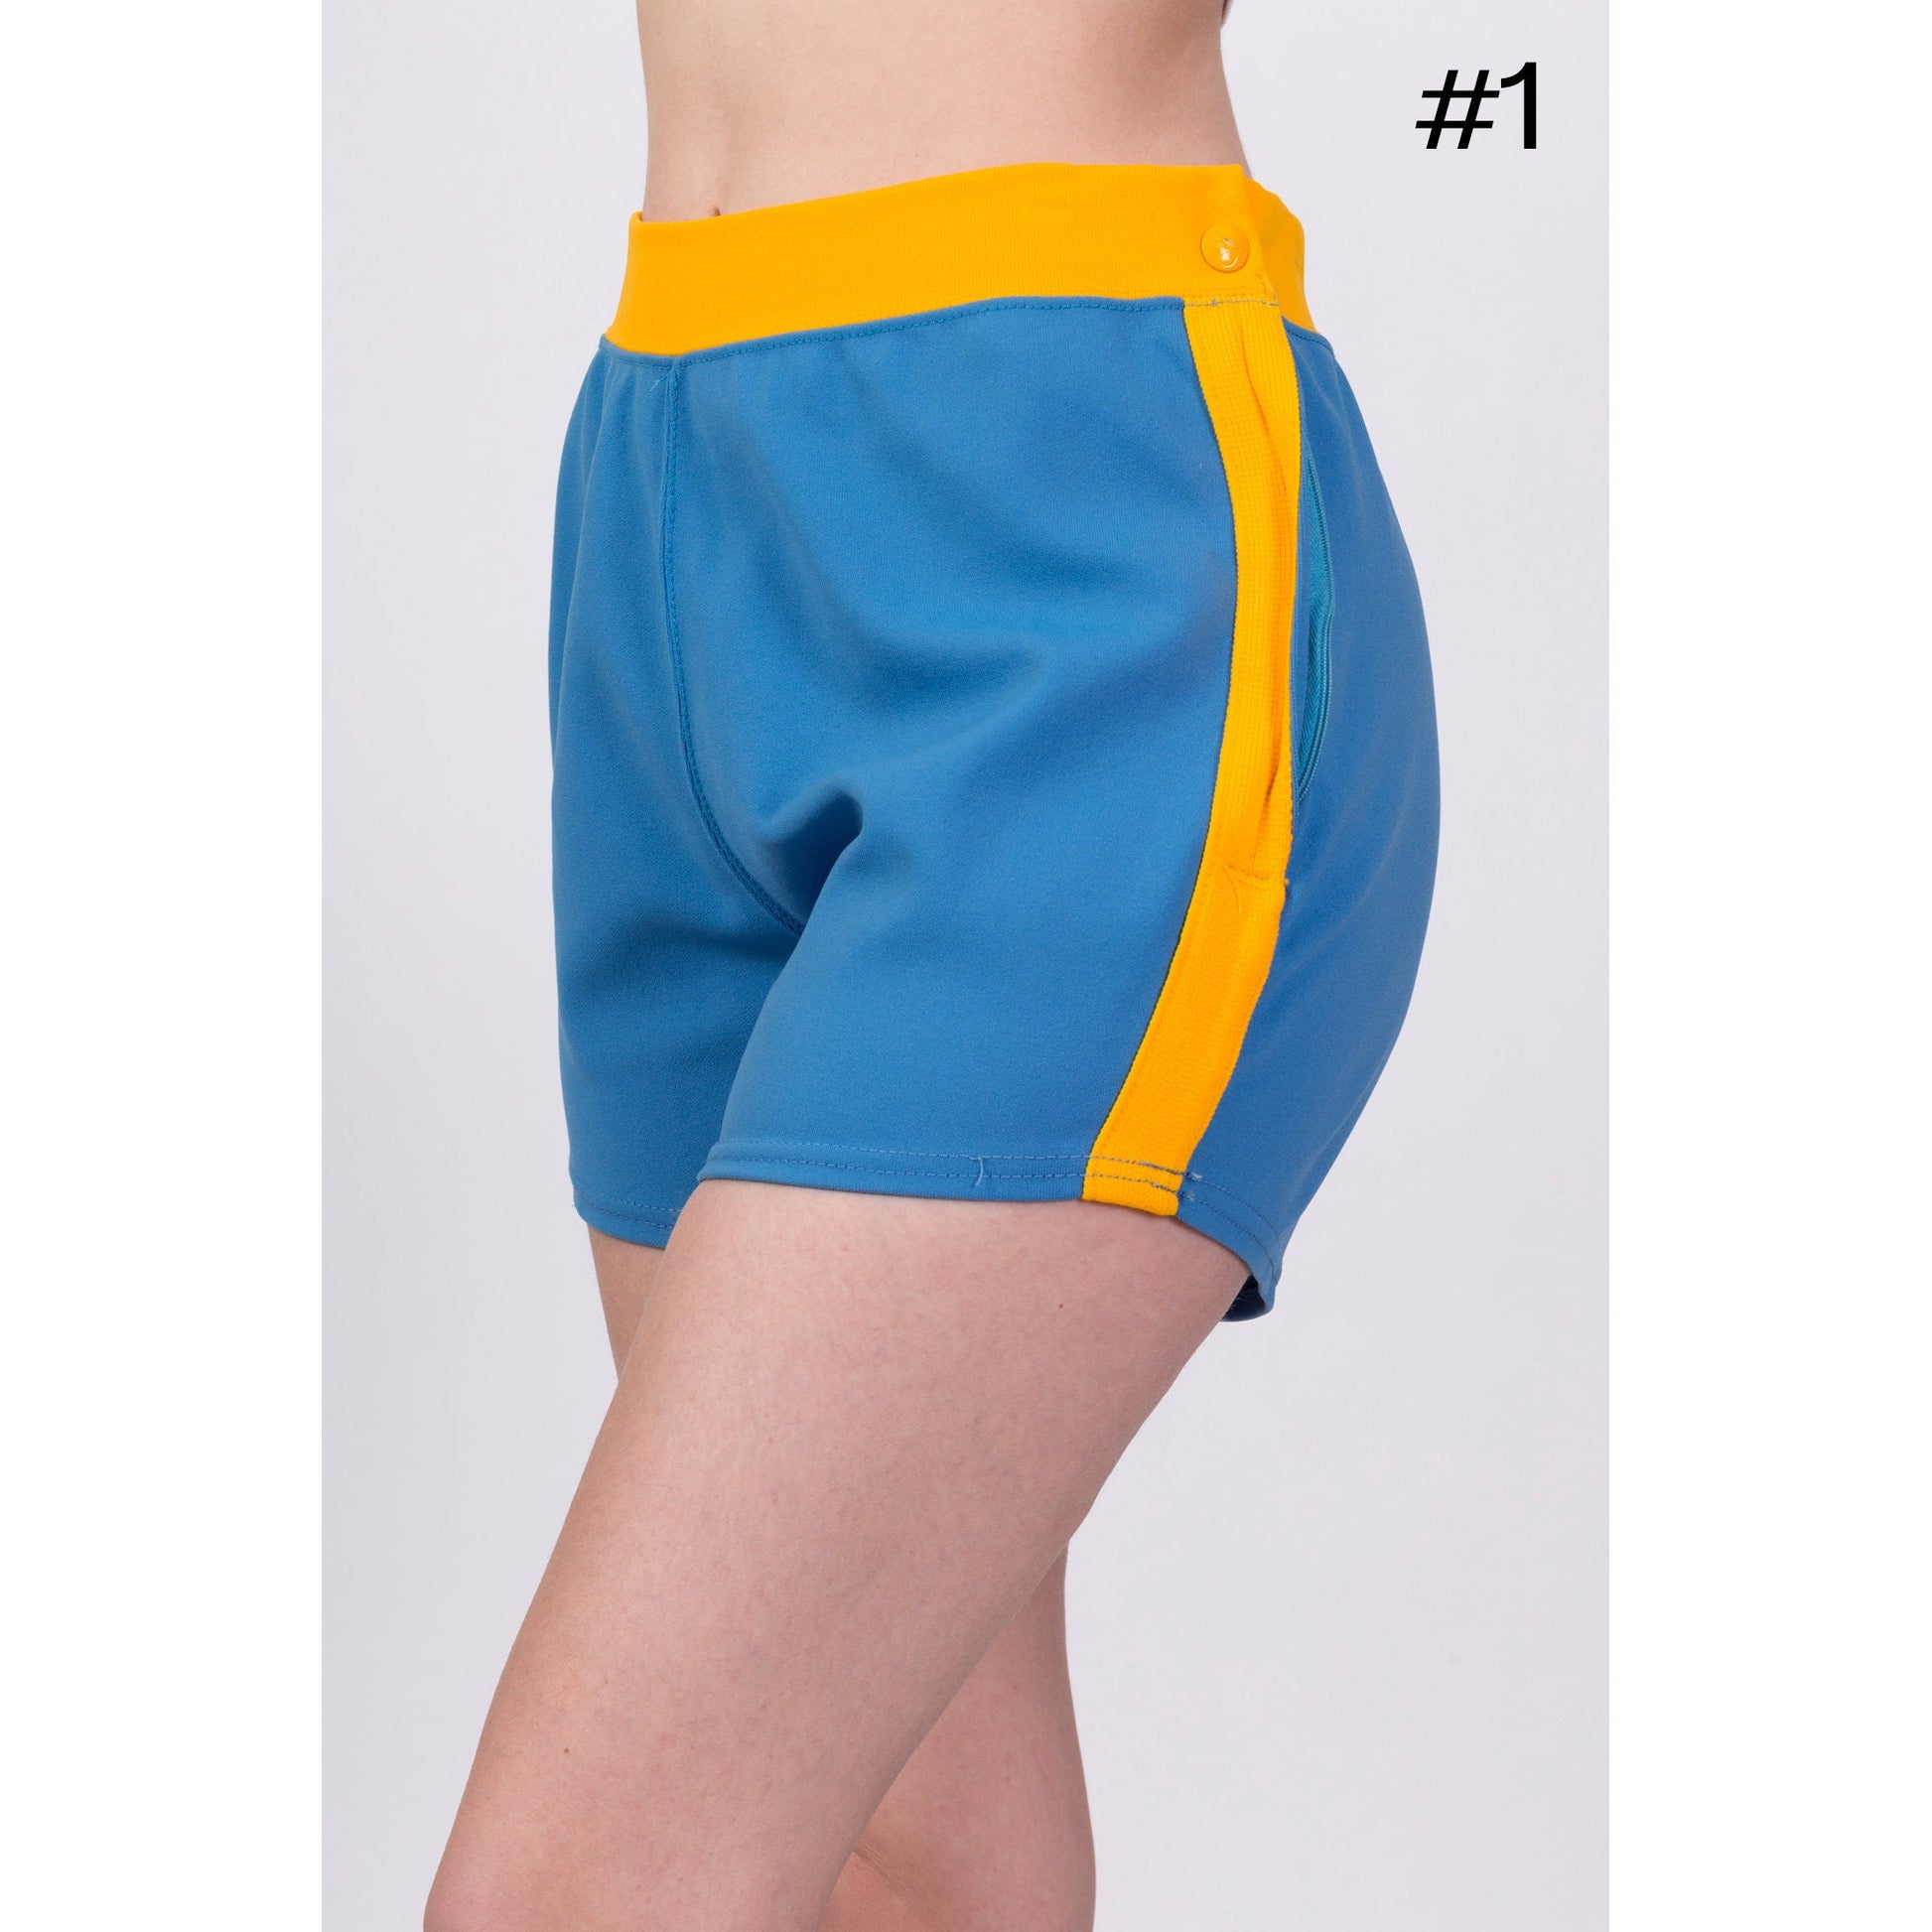 70s Blue Striped Unisex Athletic Shorts - Small to Large